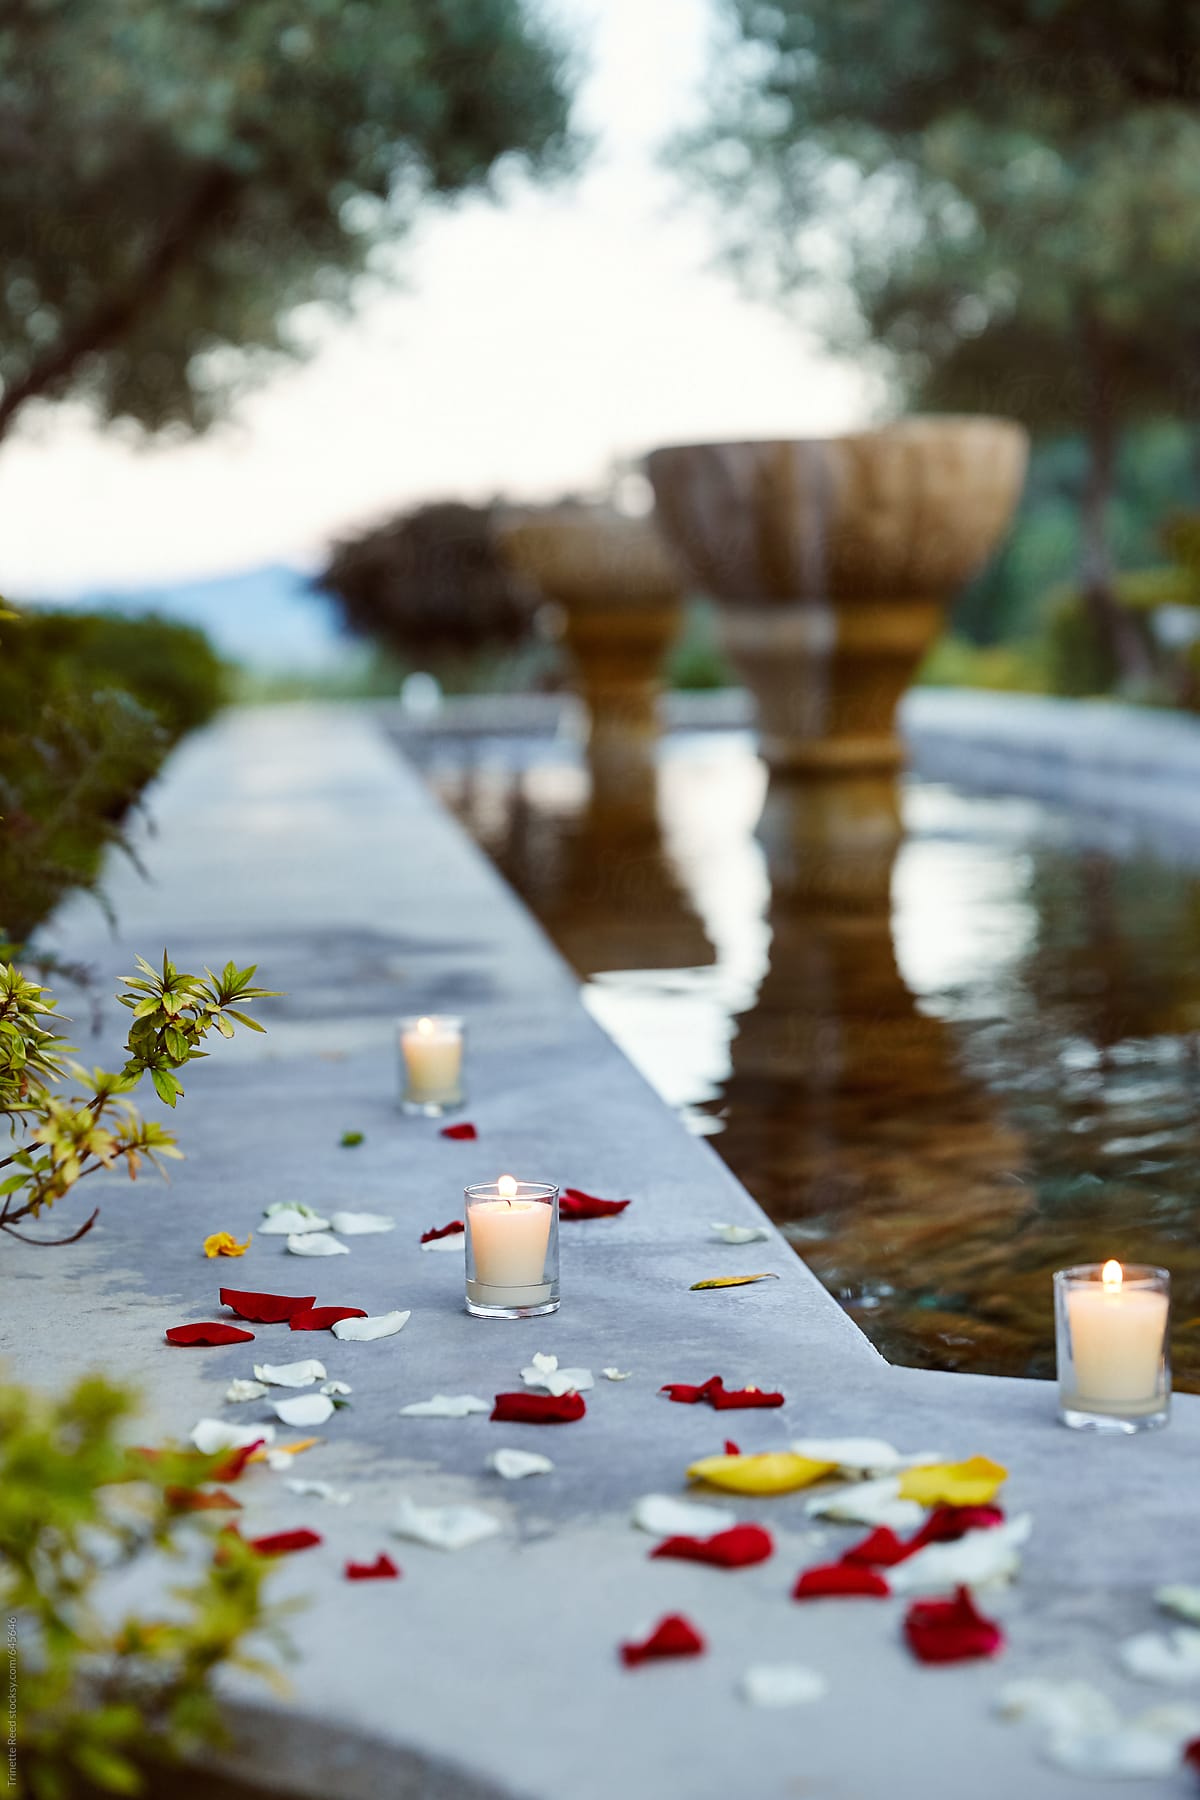 Spa fountain at dusk with rose petals and candles